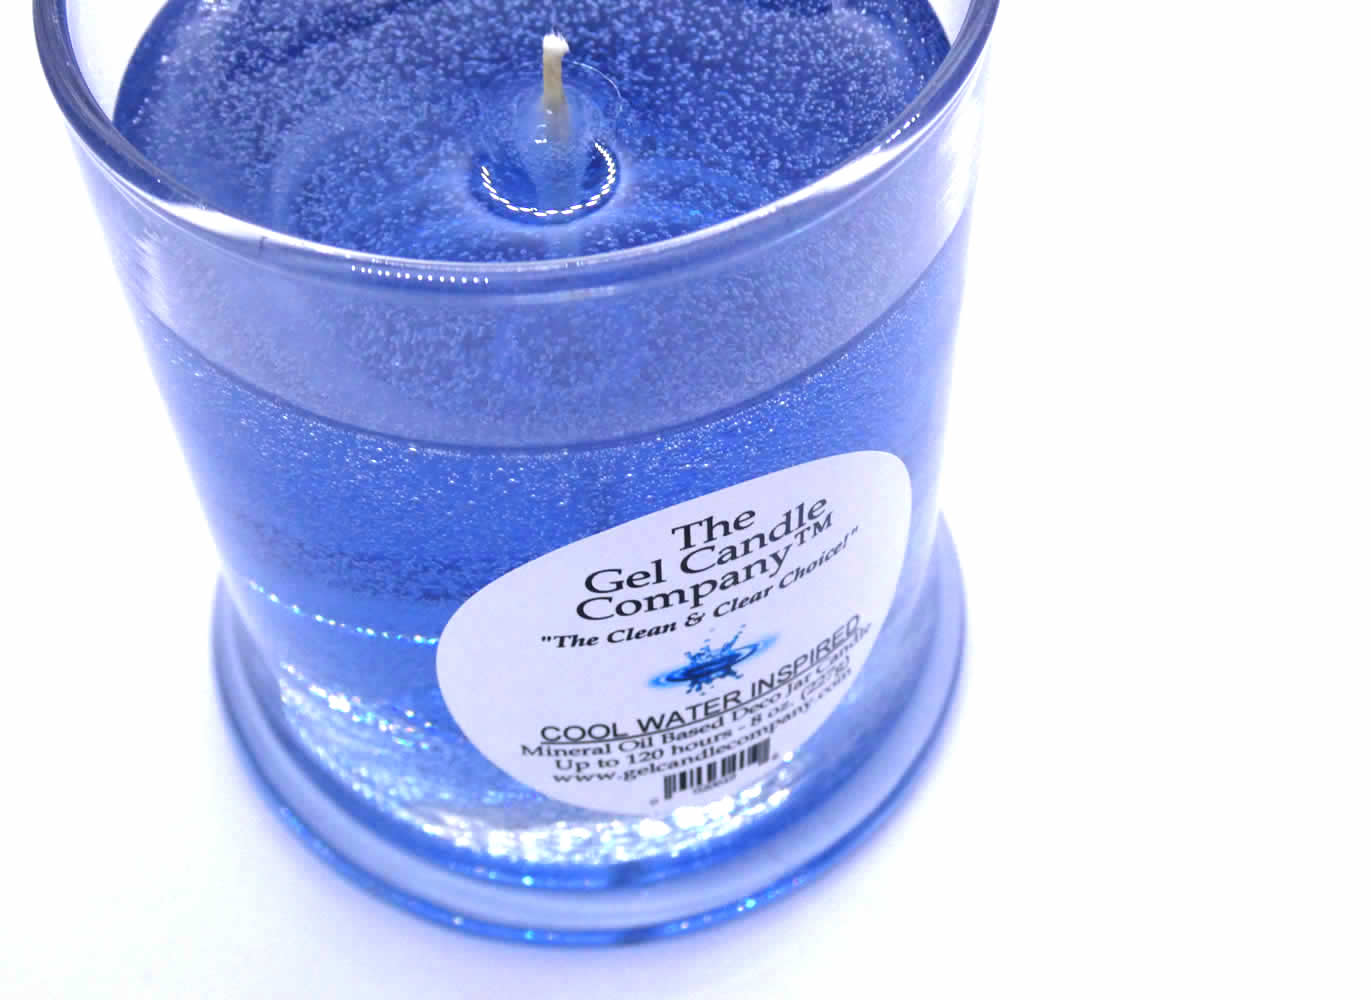 Cool Water Inspired Scented Gel Candle up to 120 Hour Deco Jar